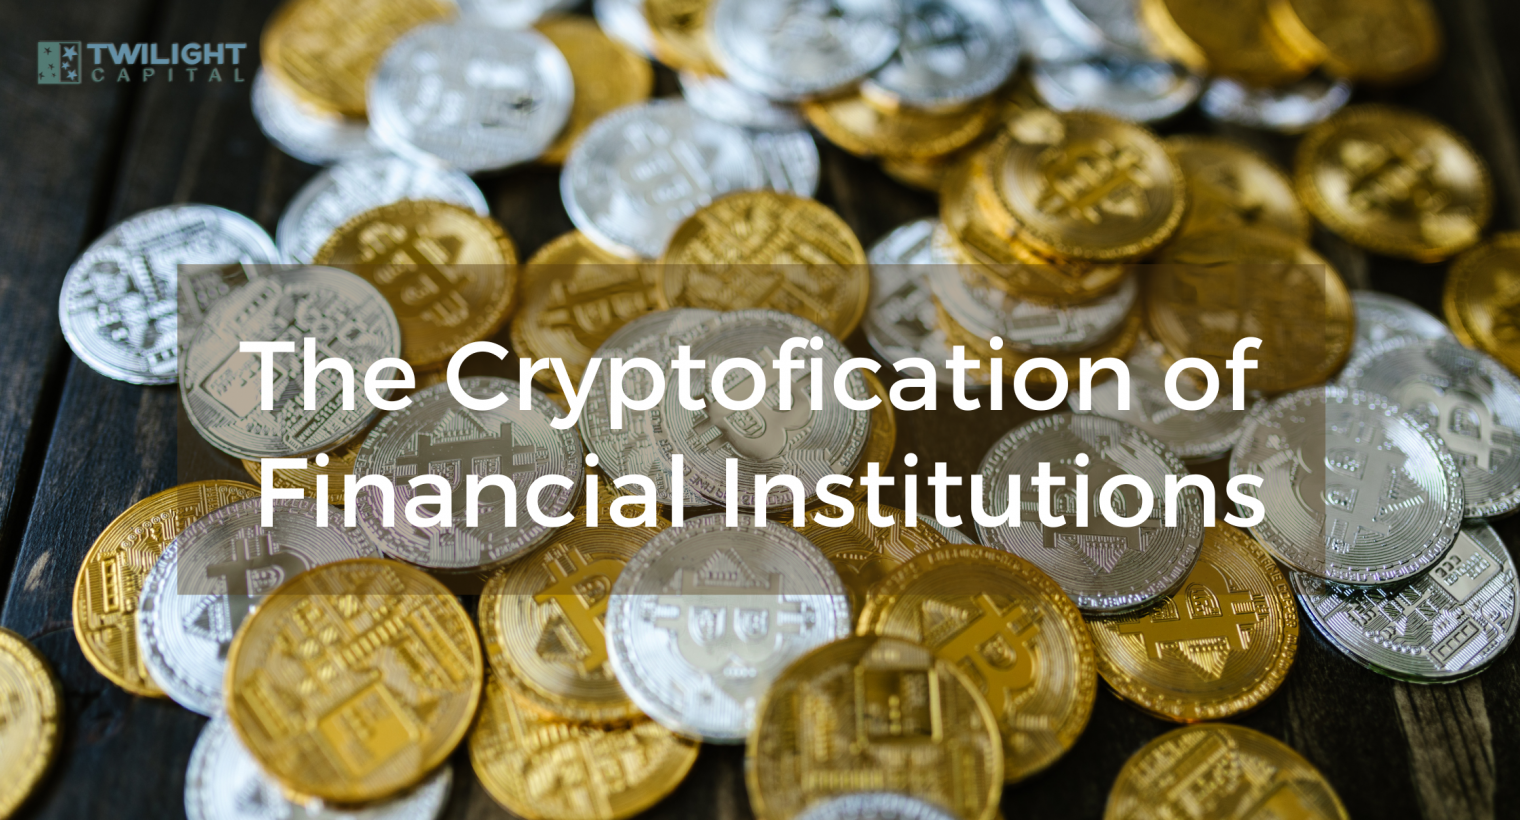 Cryptofication of financial institutions and banks